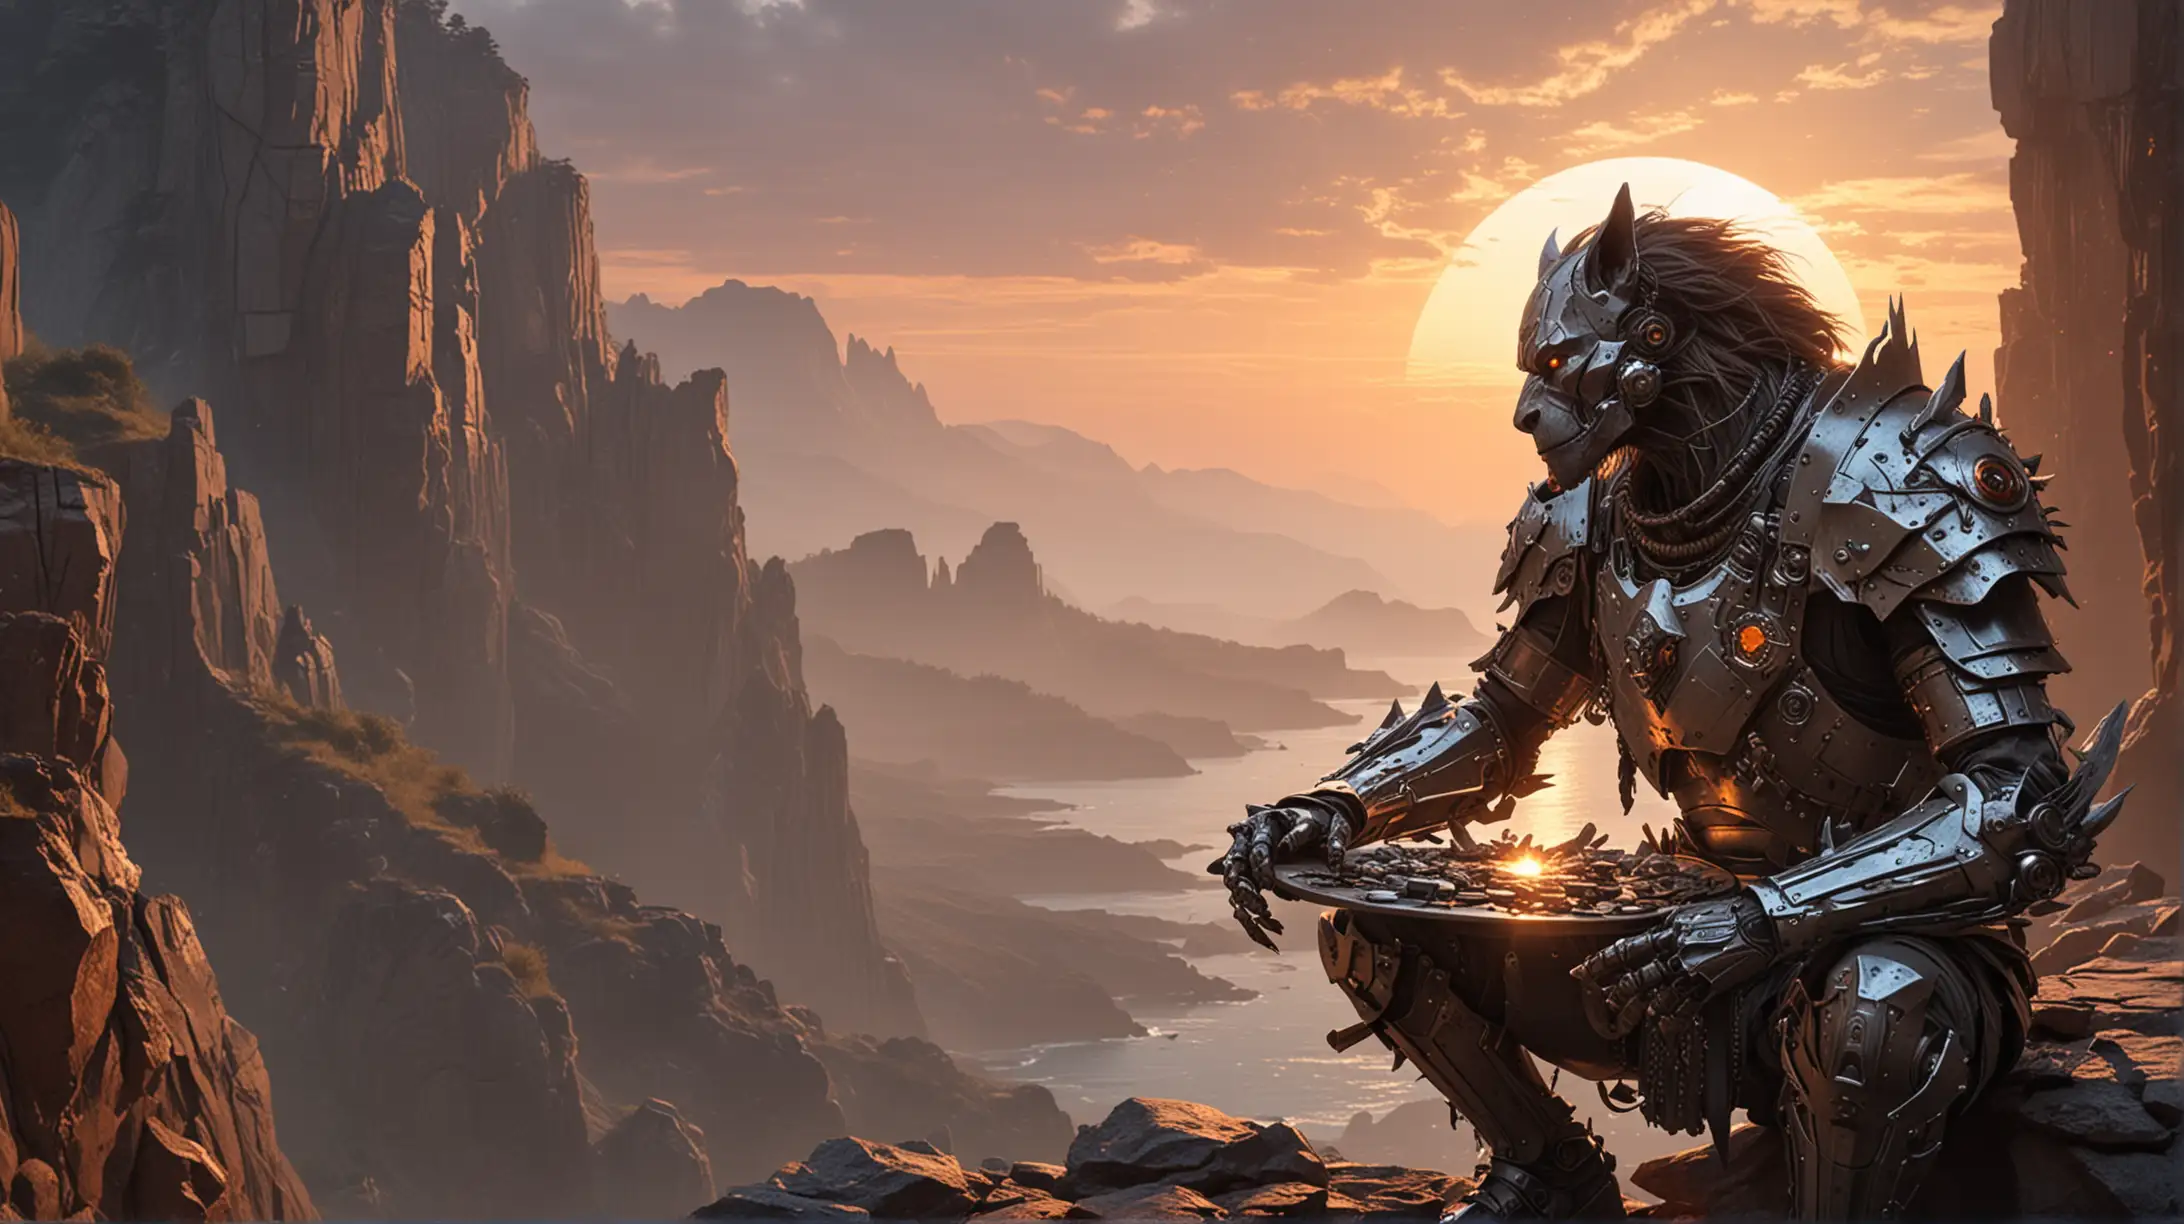 a short cyborg werewolf in ancient plate armor tinkering with metal scrap while watching the sunrise over a cliff